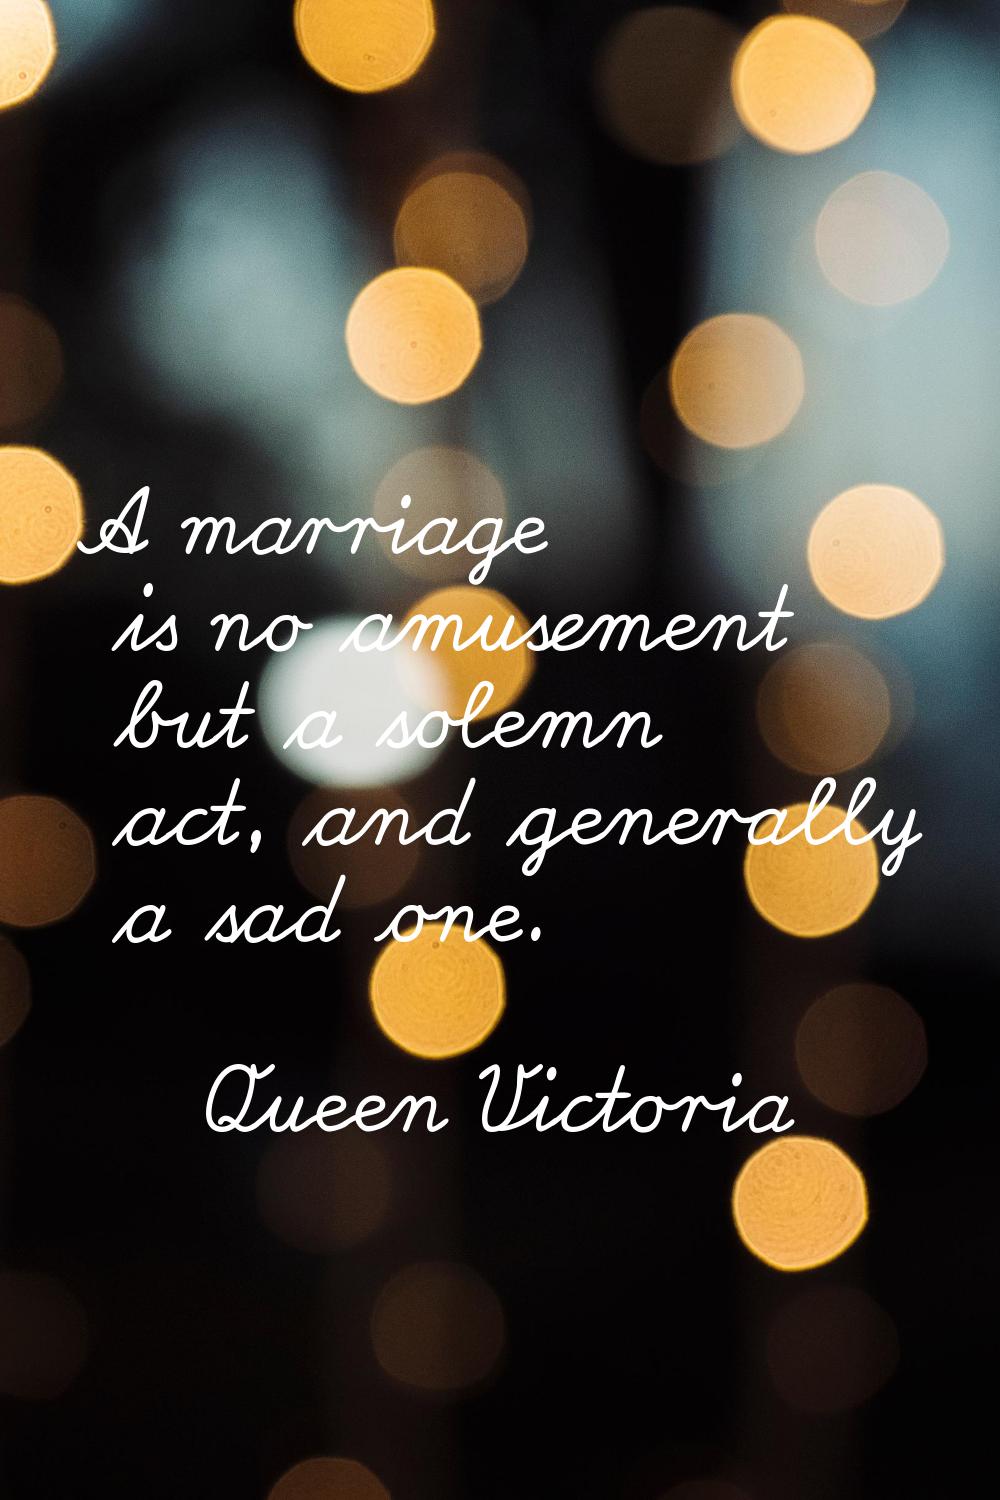 A marriage is no amusement but a solemn act, and generally a sad one.